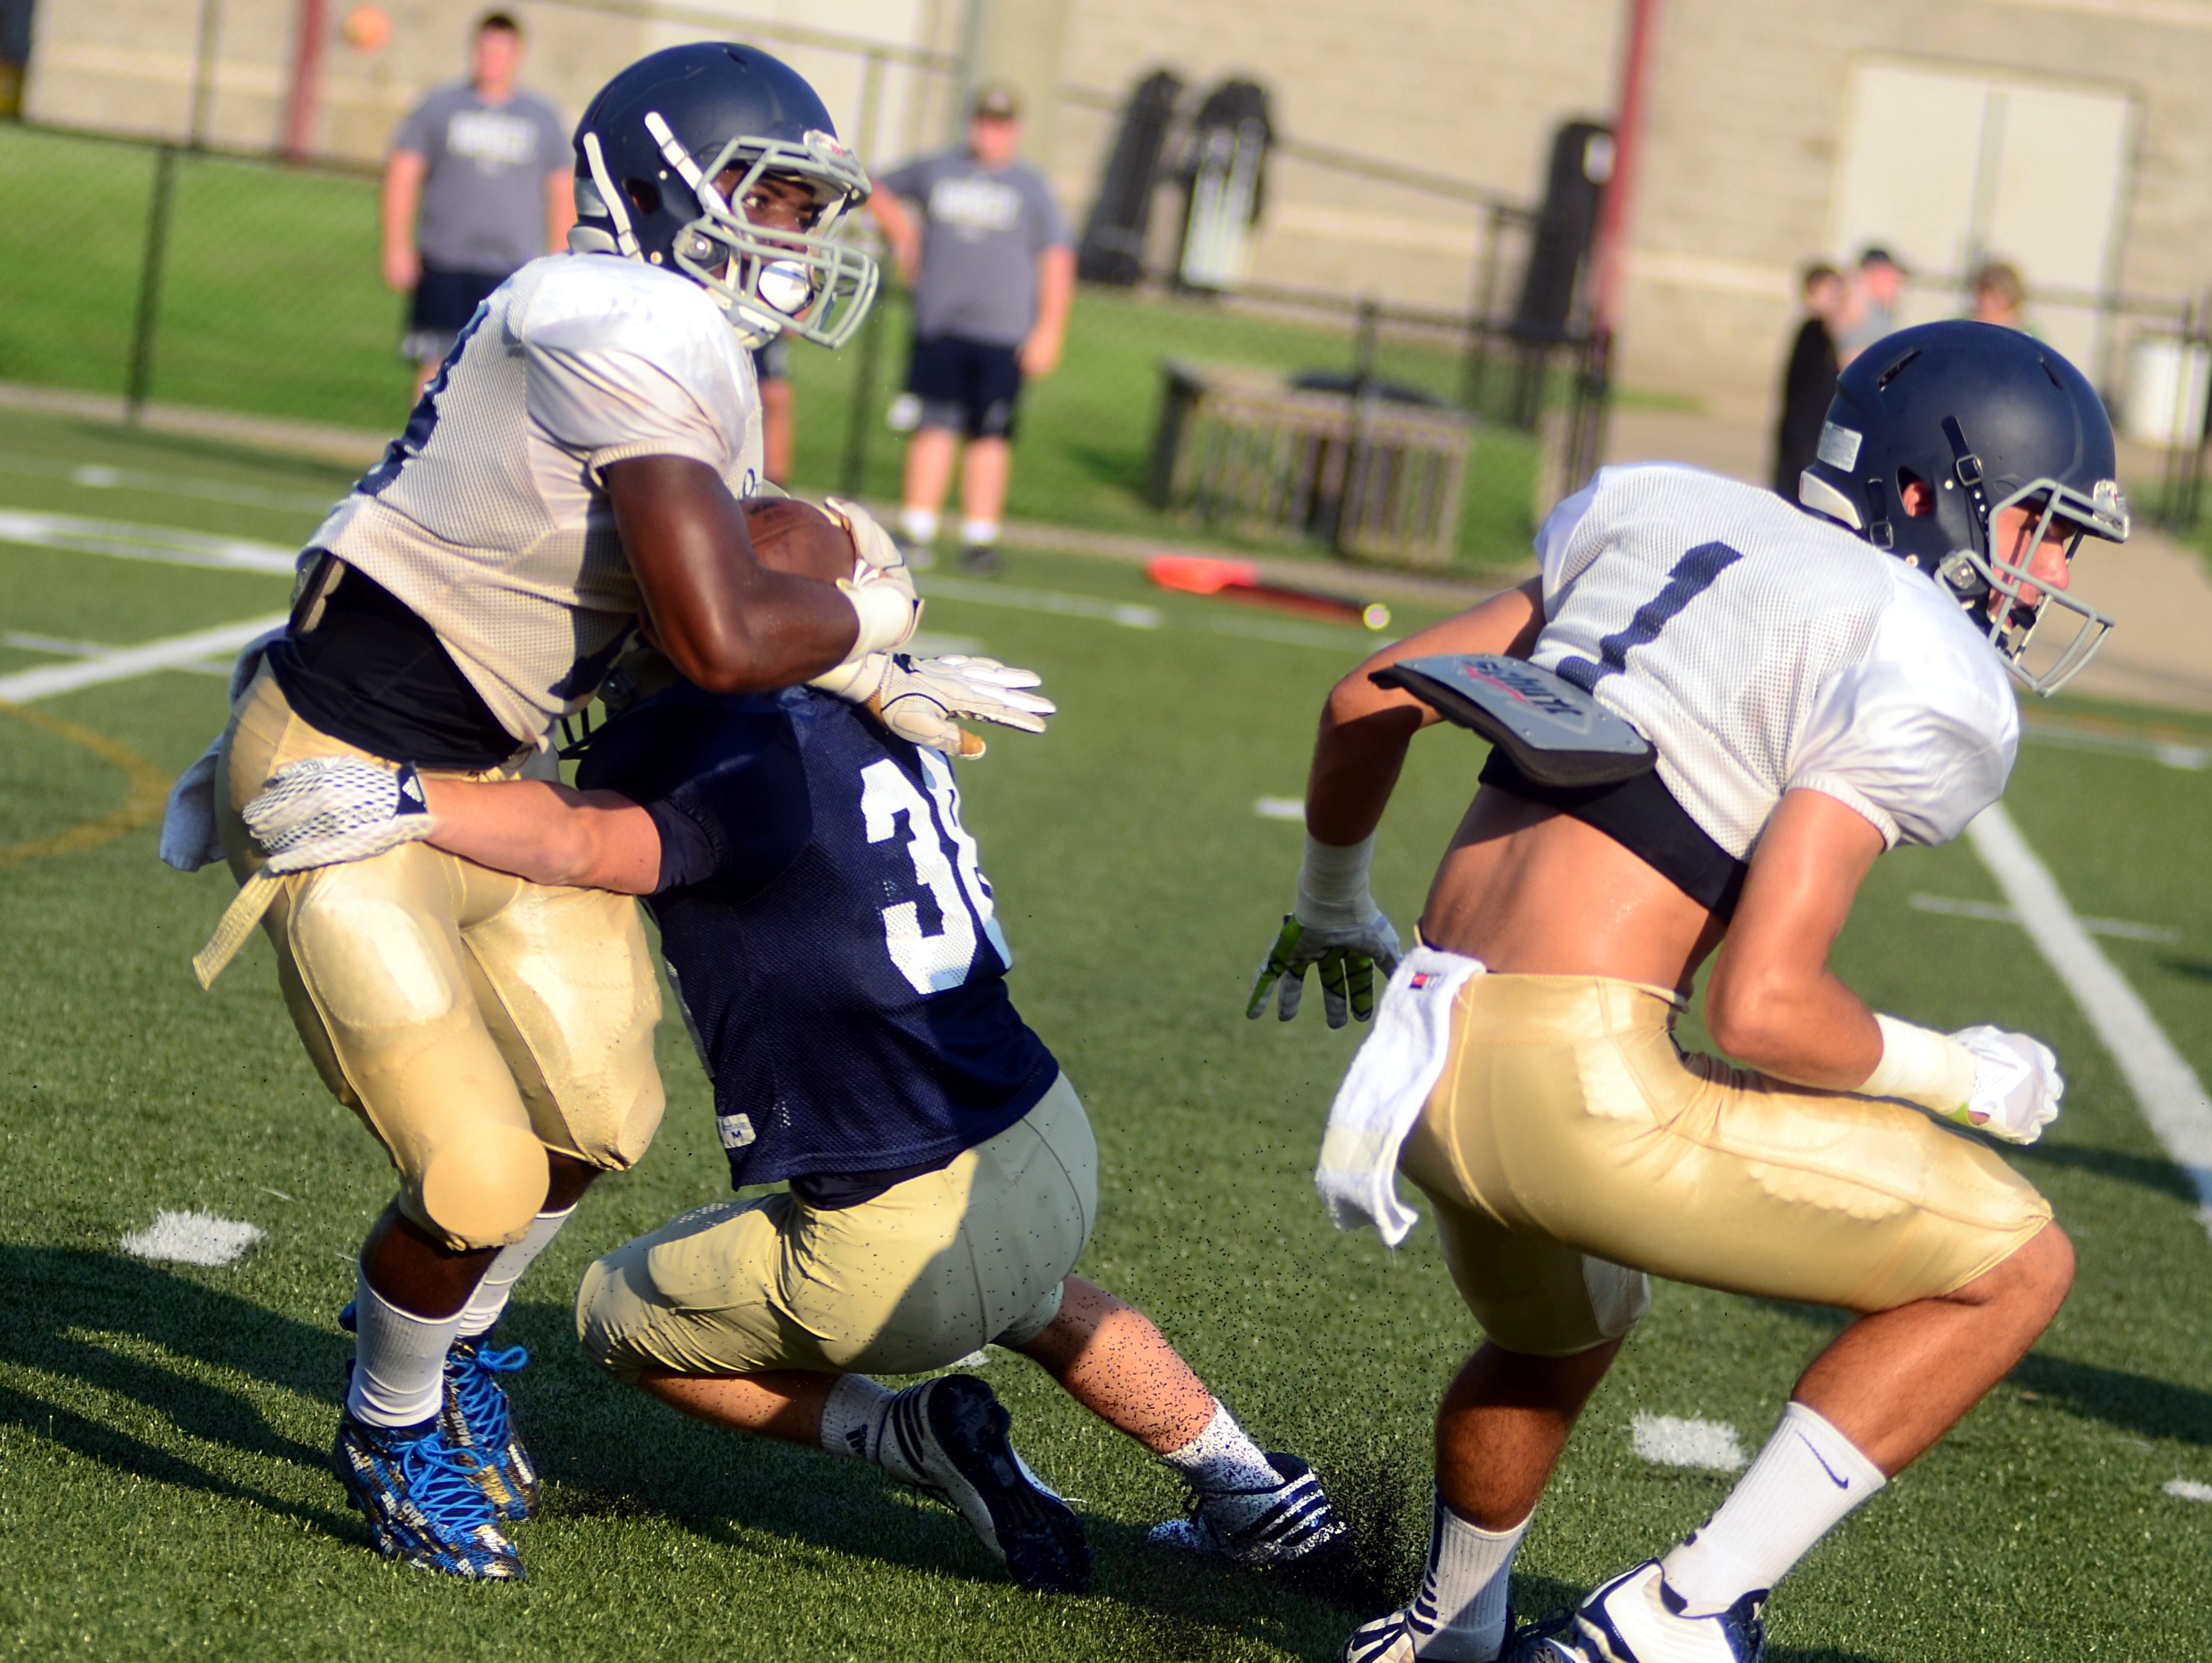 Pope John Paul II High senior C.J. Laws breaks a tackle as classmate Pace Dempsey (1) sets up a block during Friday's scrimmage against Sycamore.